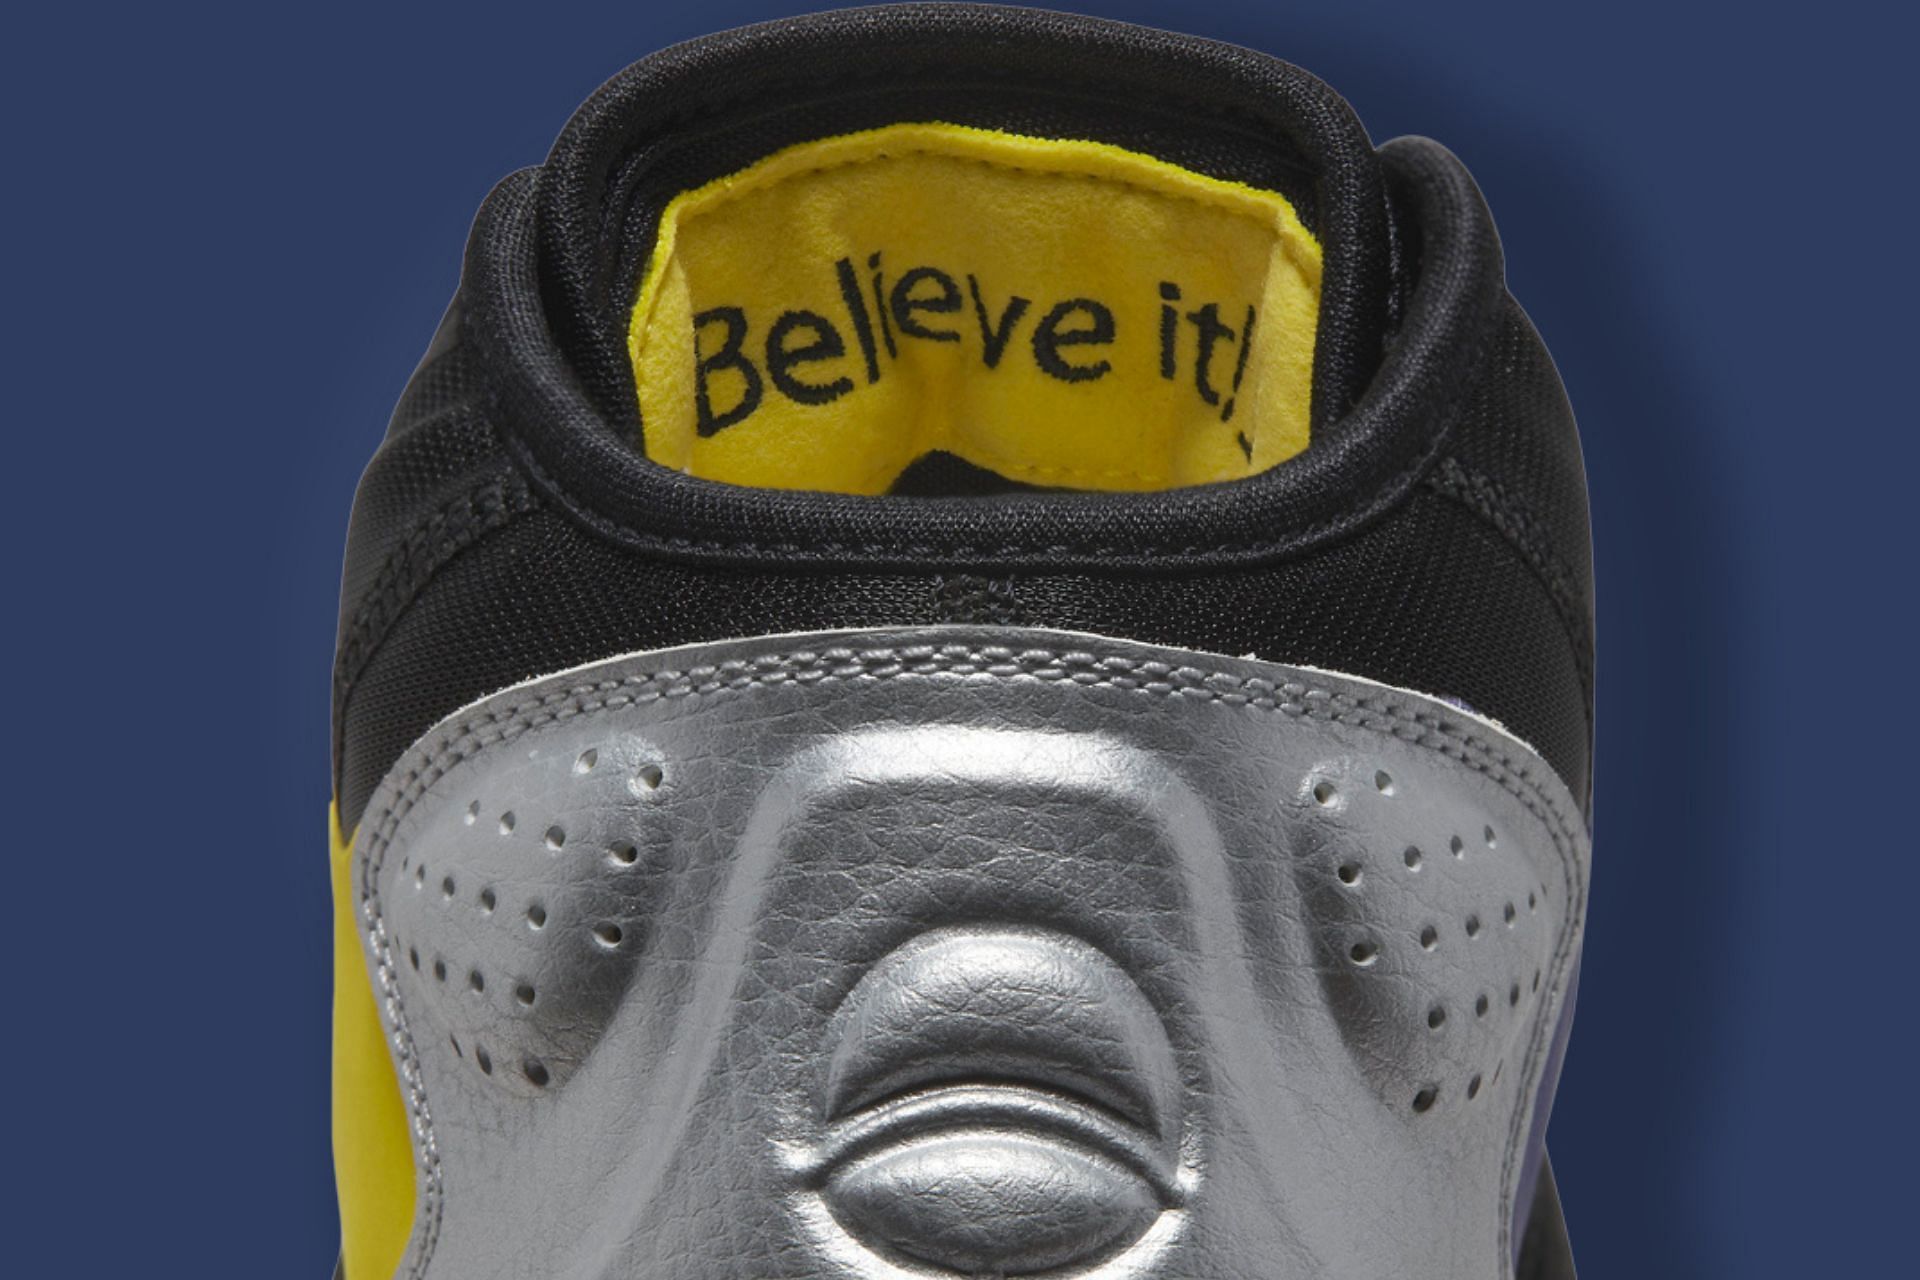 Here&#039;s a view at the rear sides of the tongues (Image via Nike)